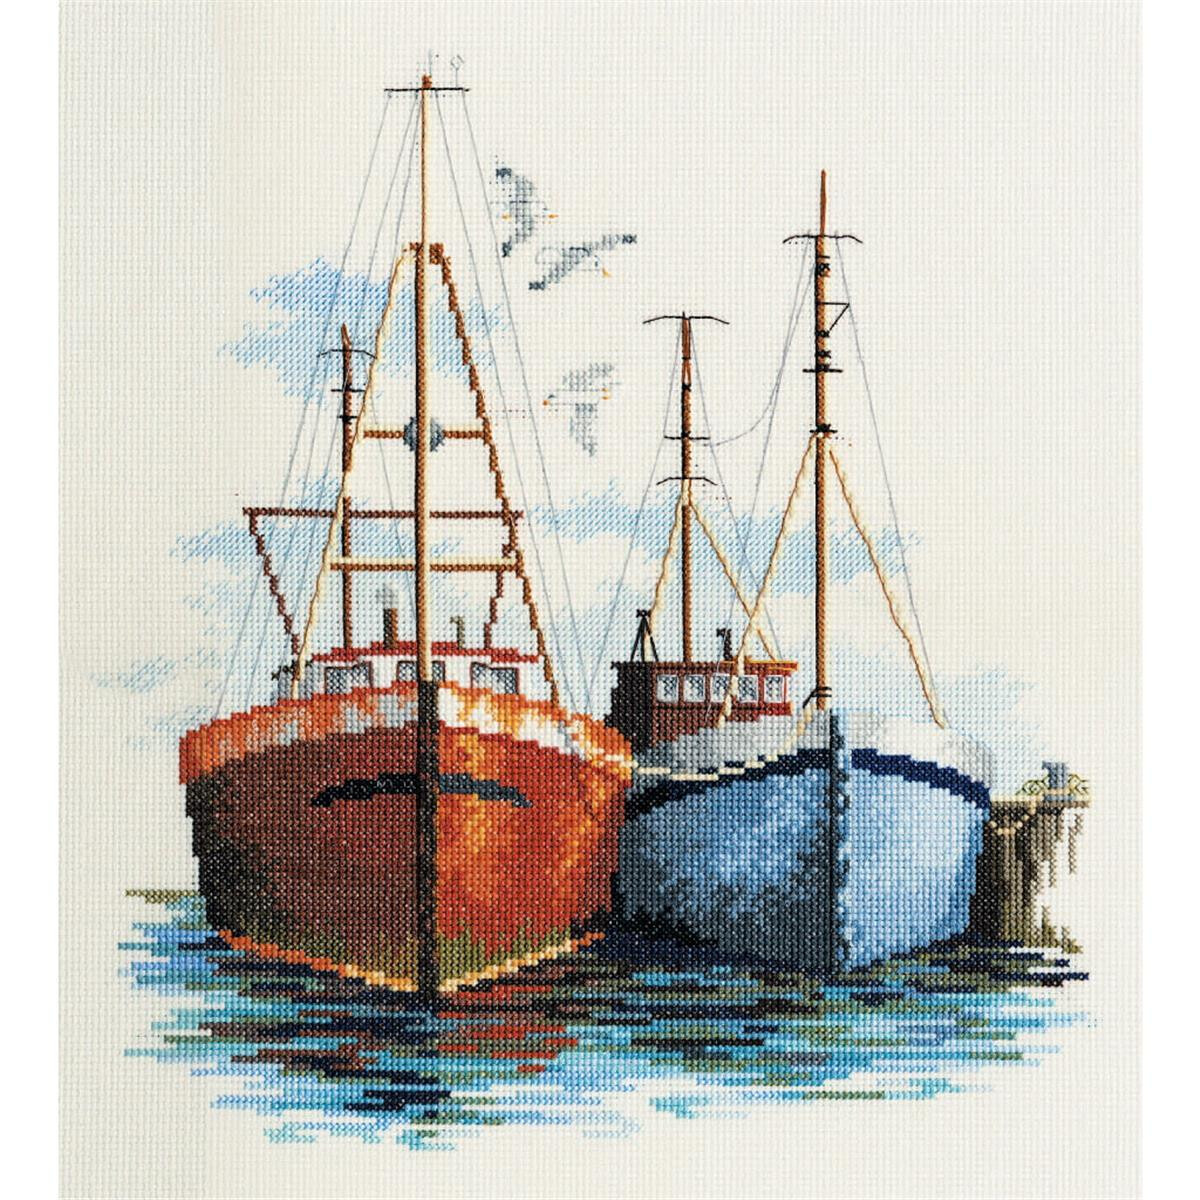 An embroidery pack from Bothy Threads showing two moored...